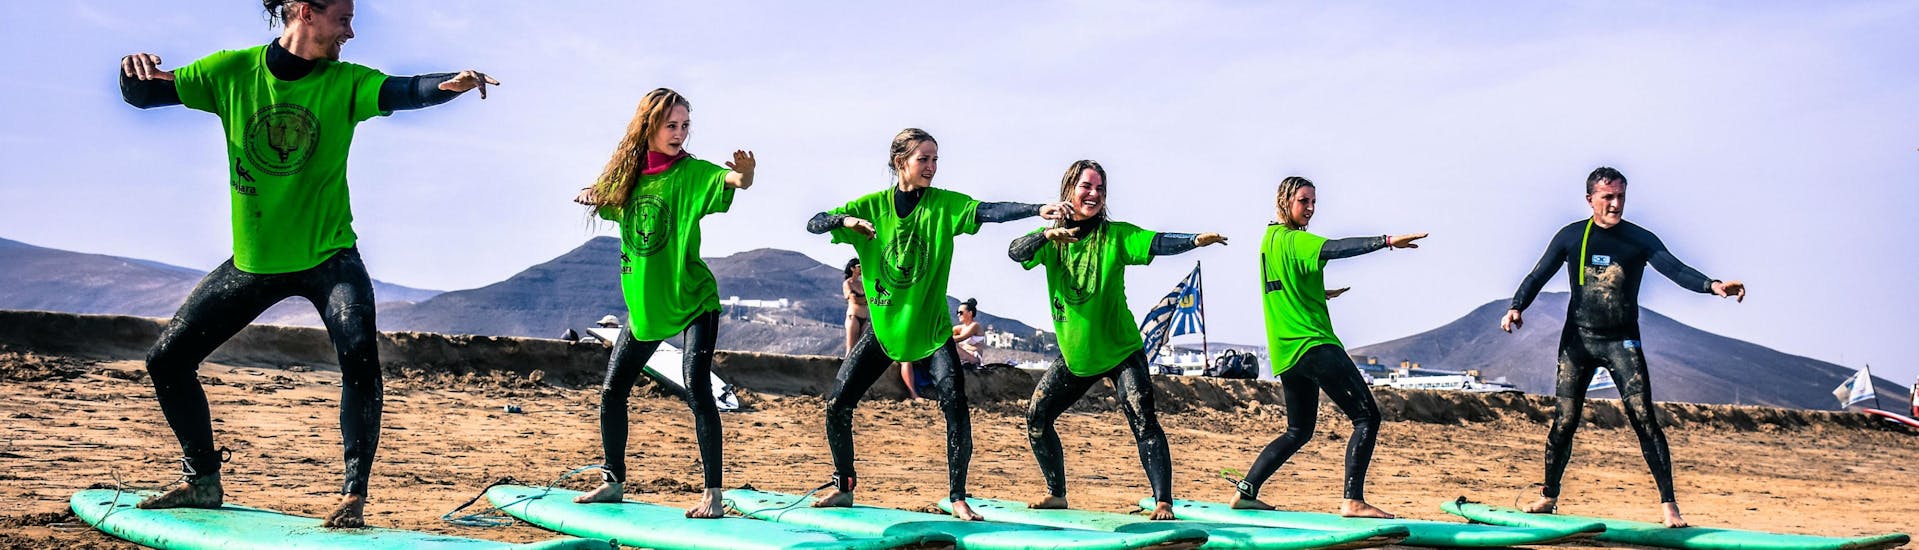 Surfing Lessons for Kids &amp; Adults - Beginner with Matas Bay Surf School - Hero image